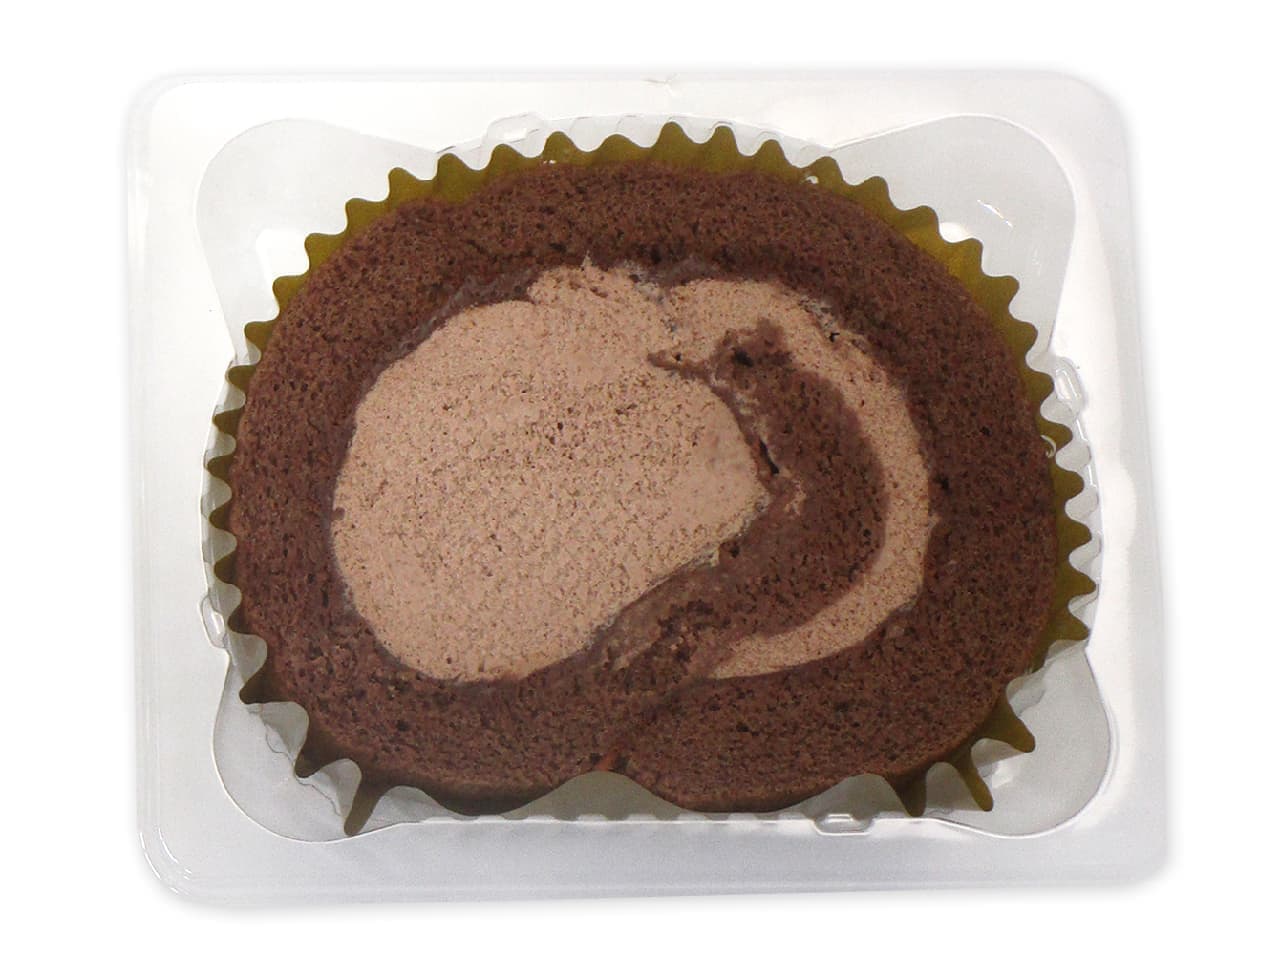 7-ELEVEN "Chocolat Roll Cake with 72% Cacao Chocolate